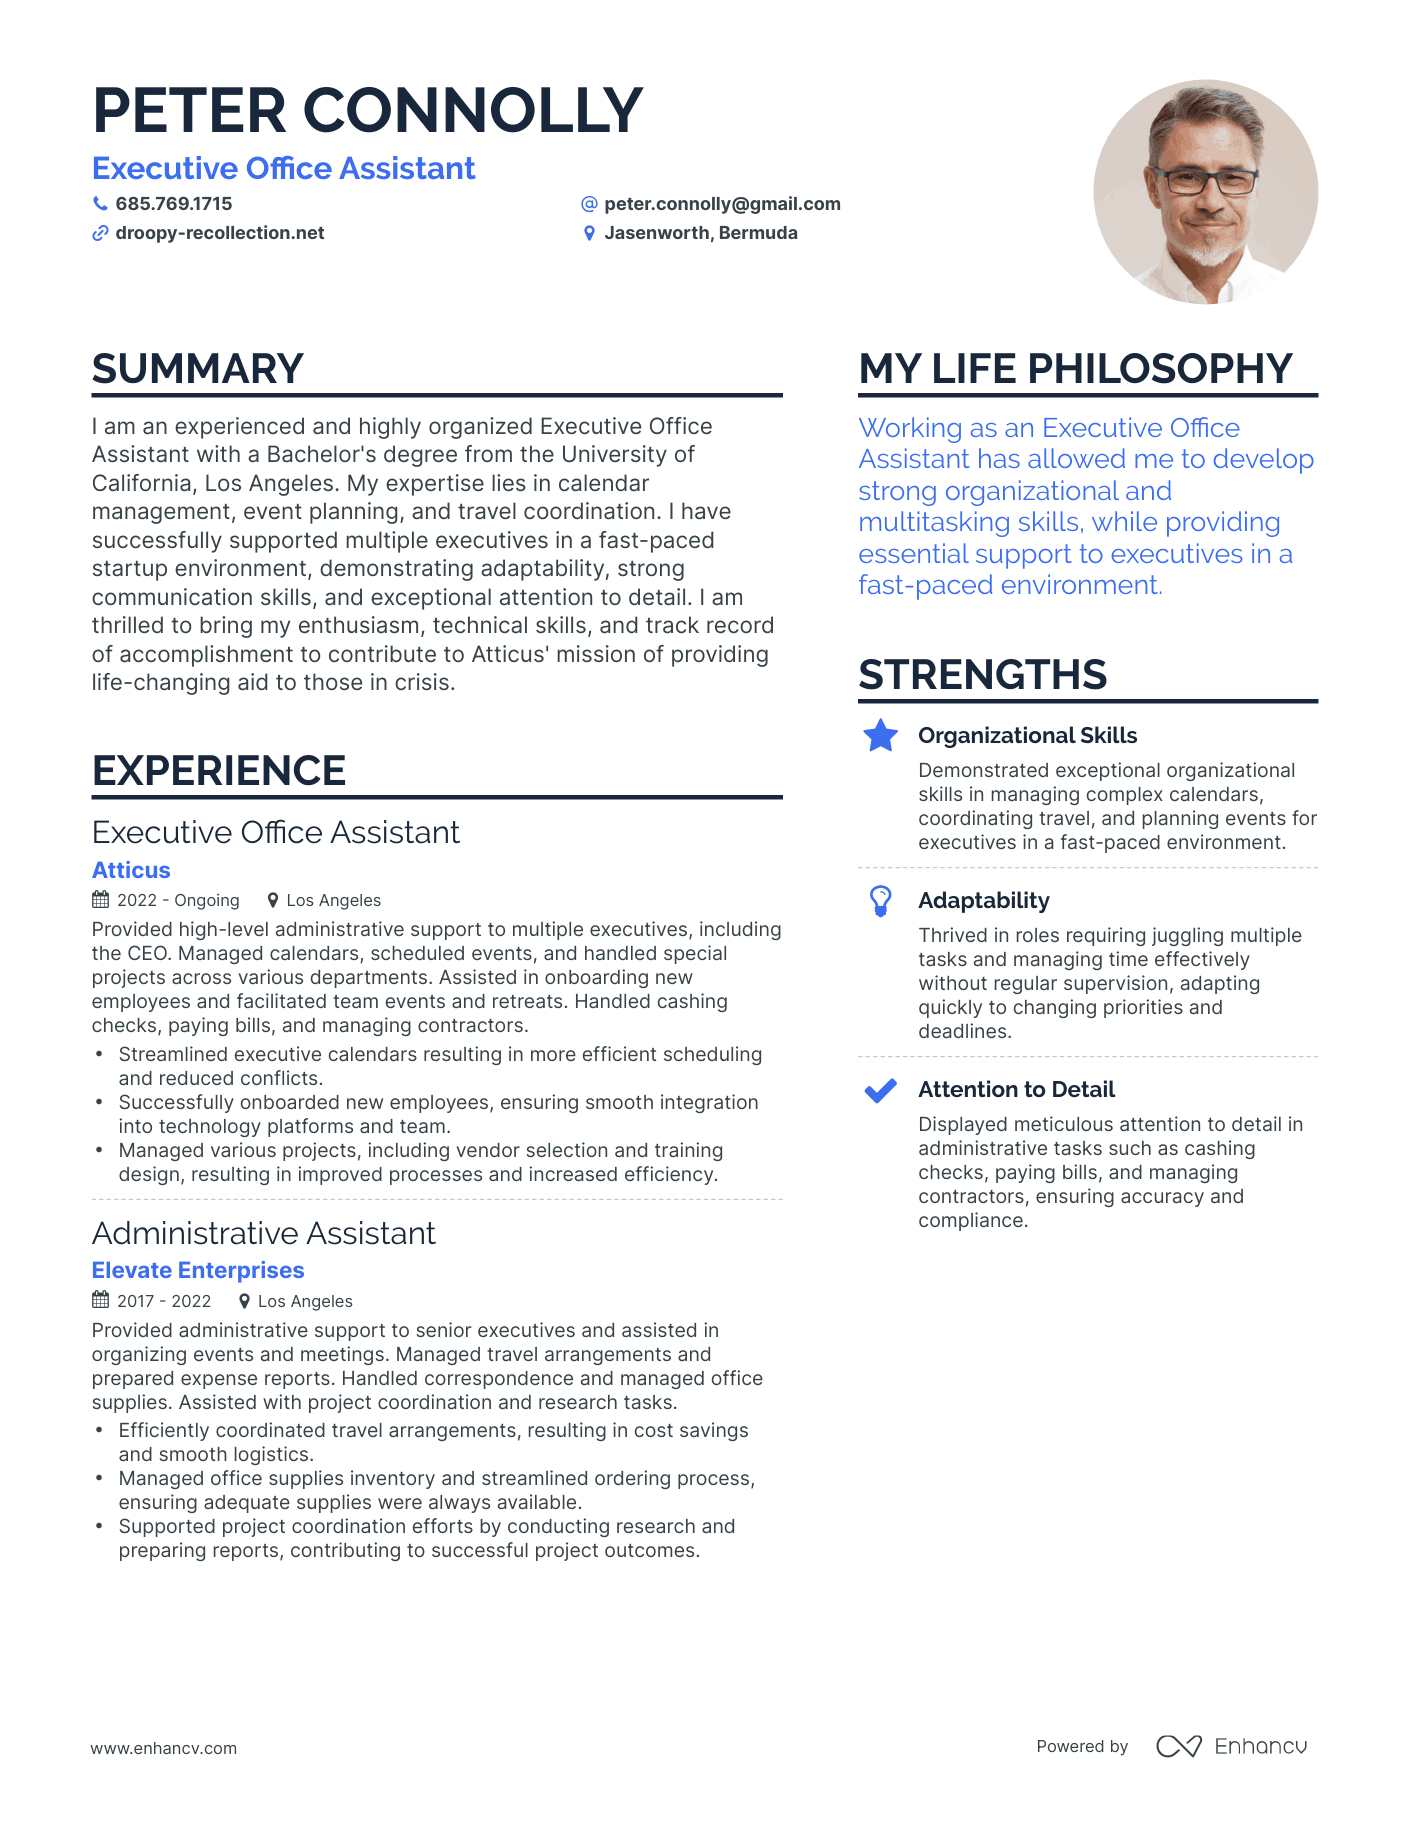 Executive Office Assistant resume example